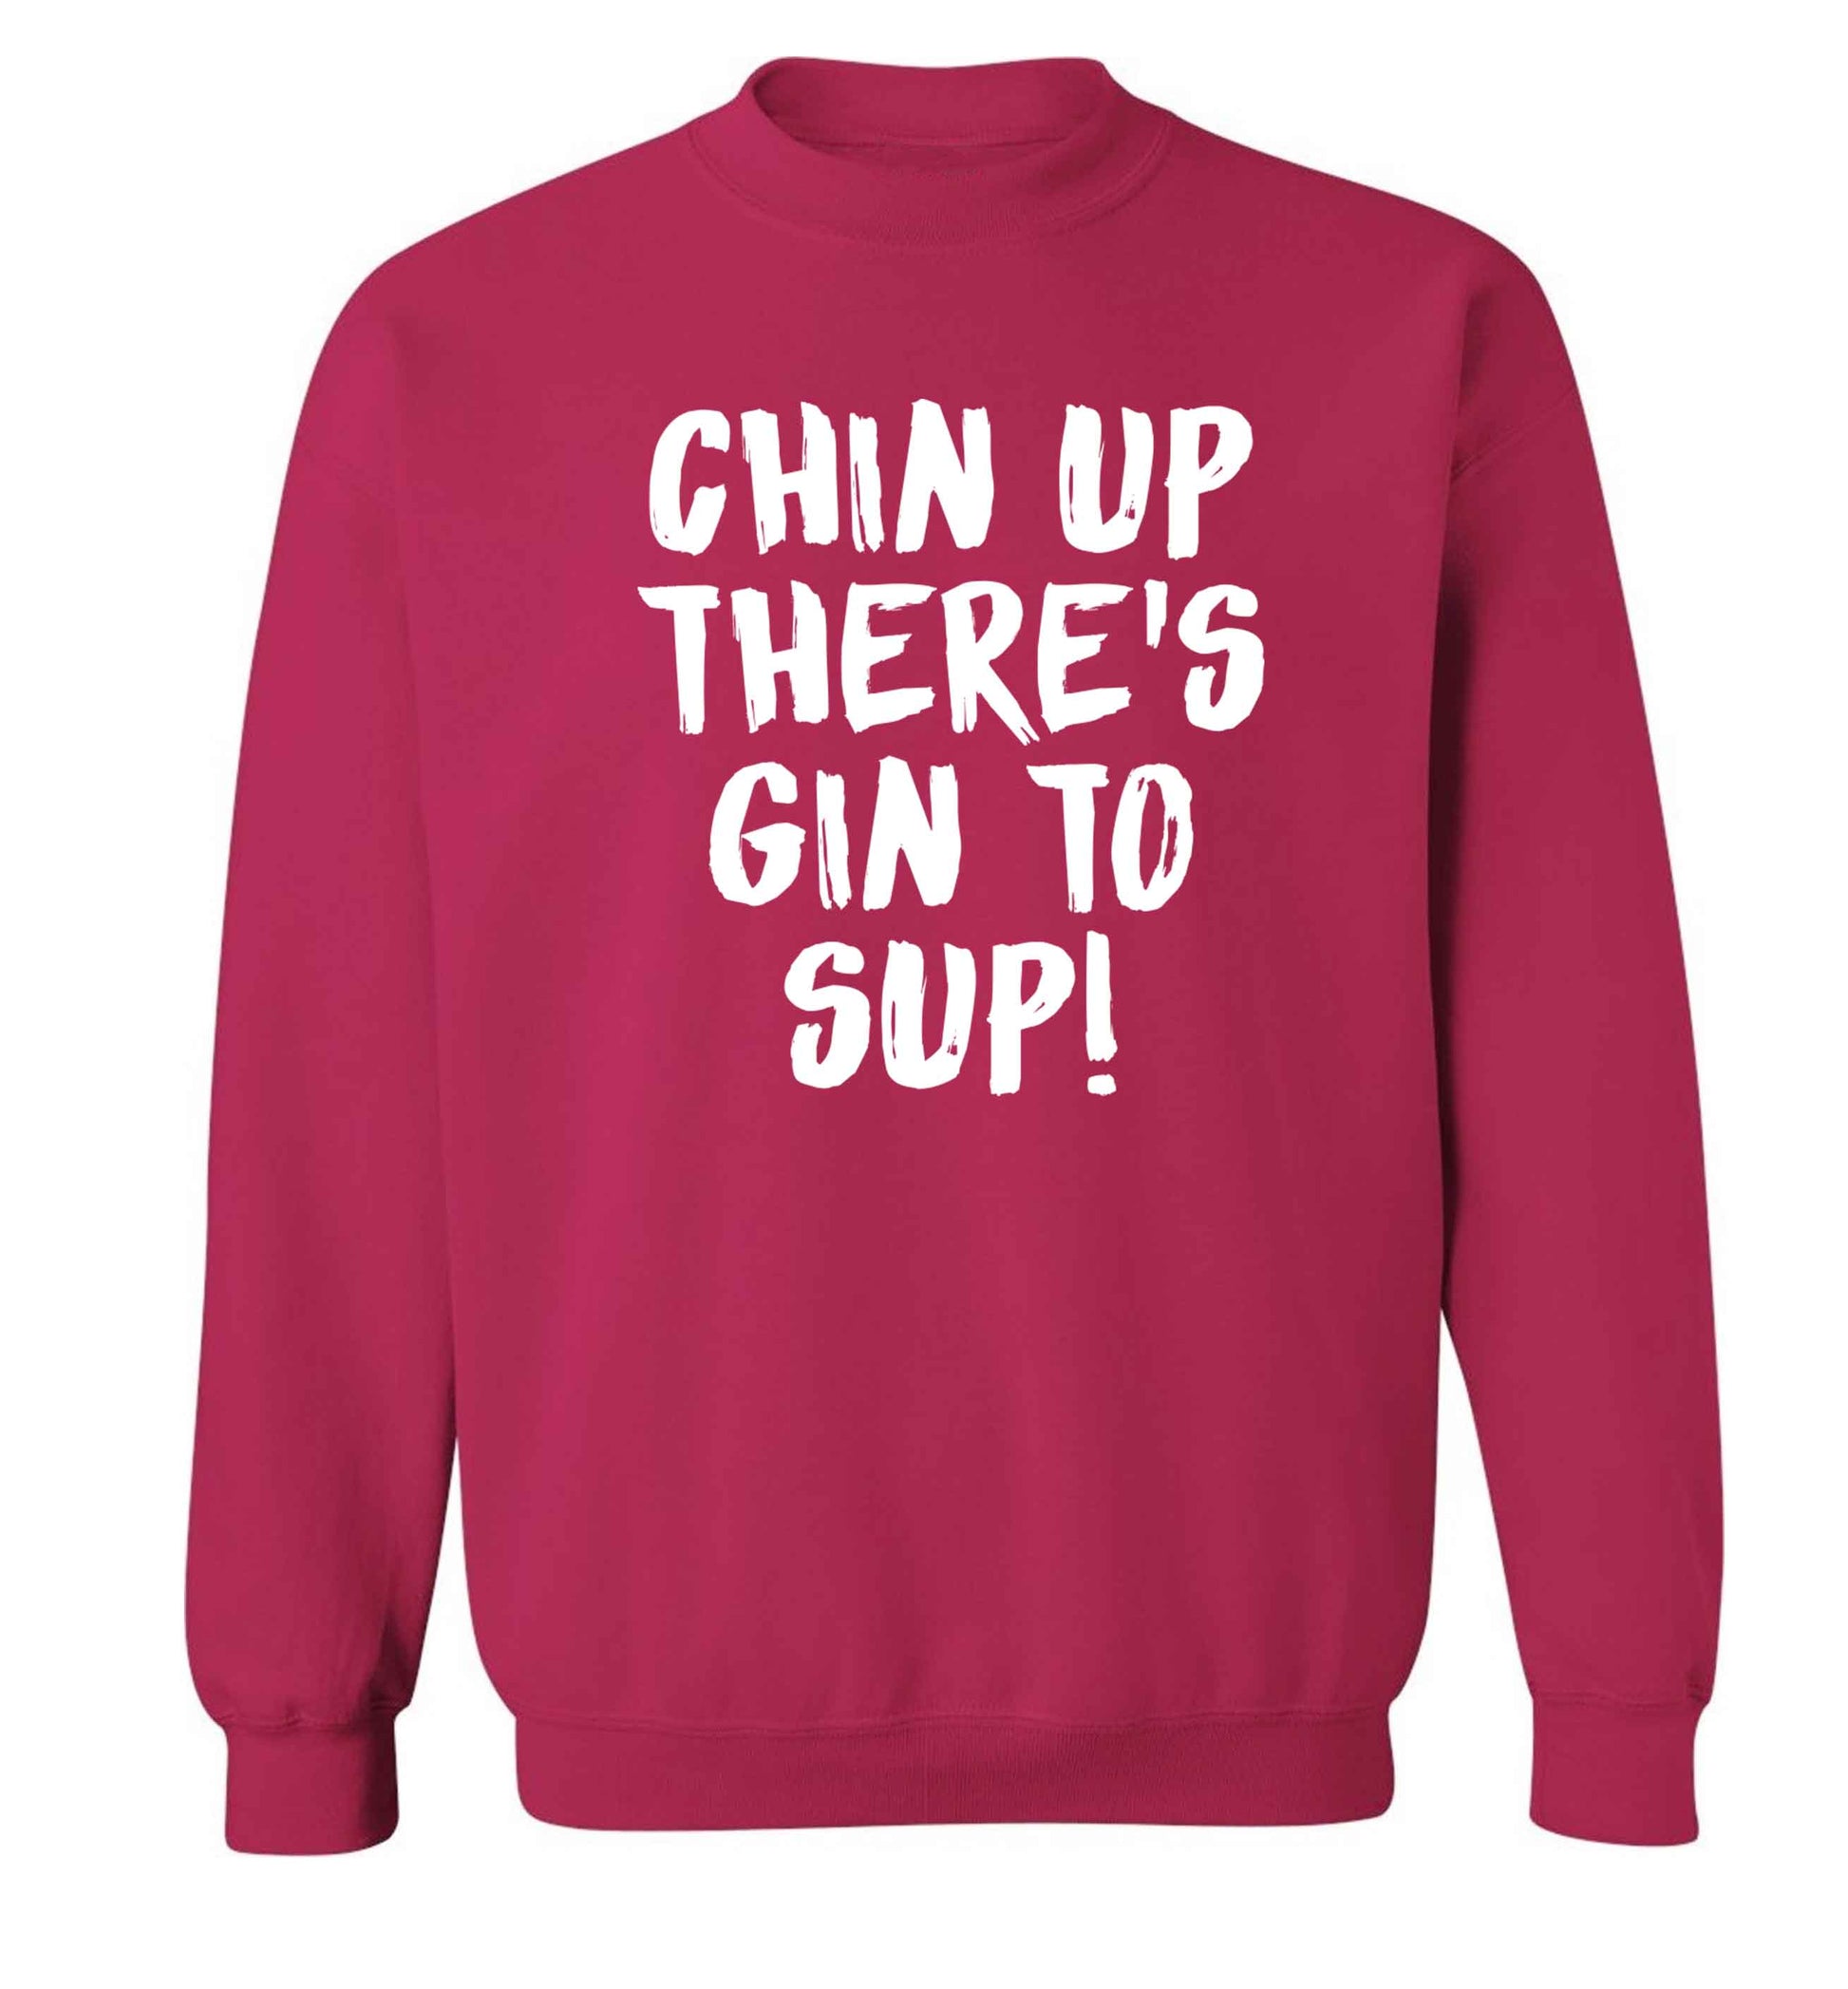 Chin up there's gin to sup Adult's unisex pink Sweater 2XL